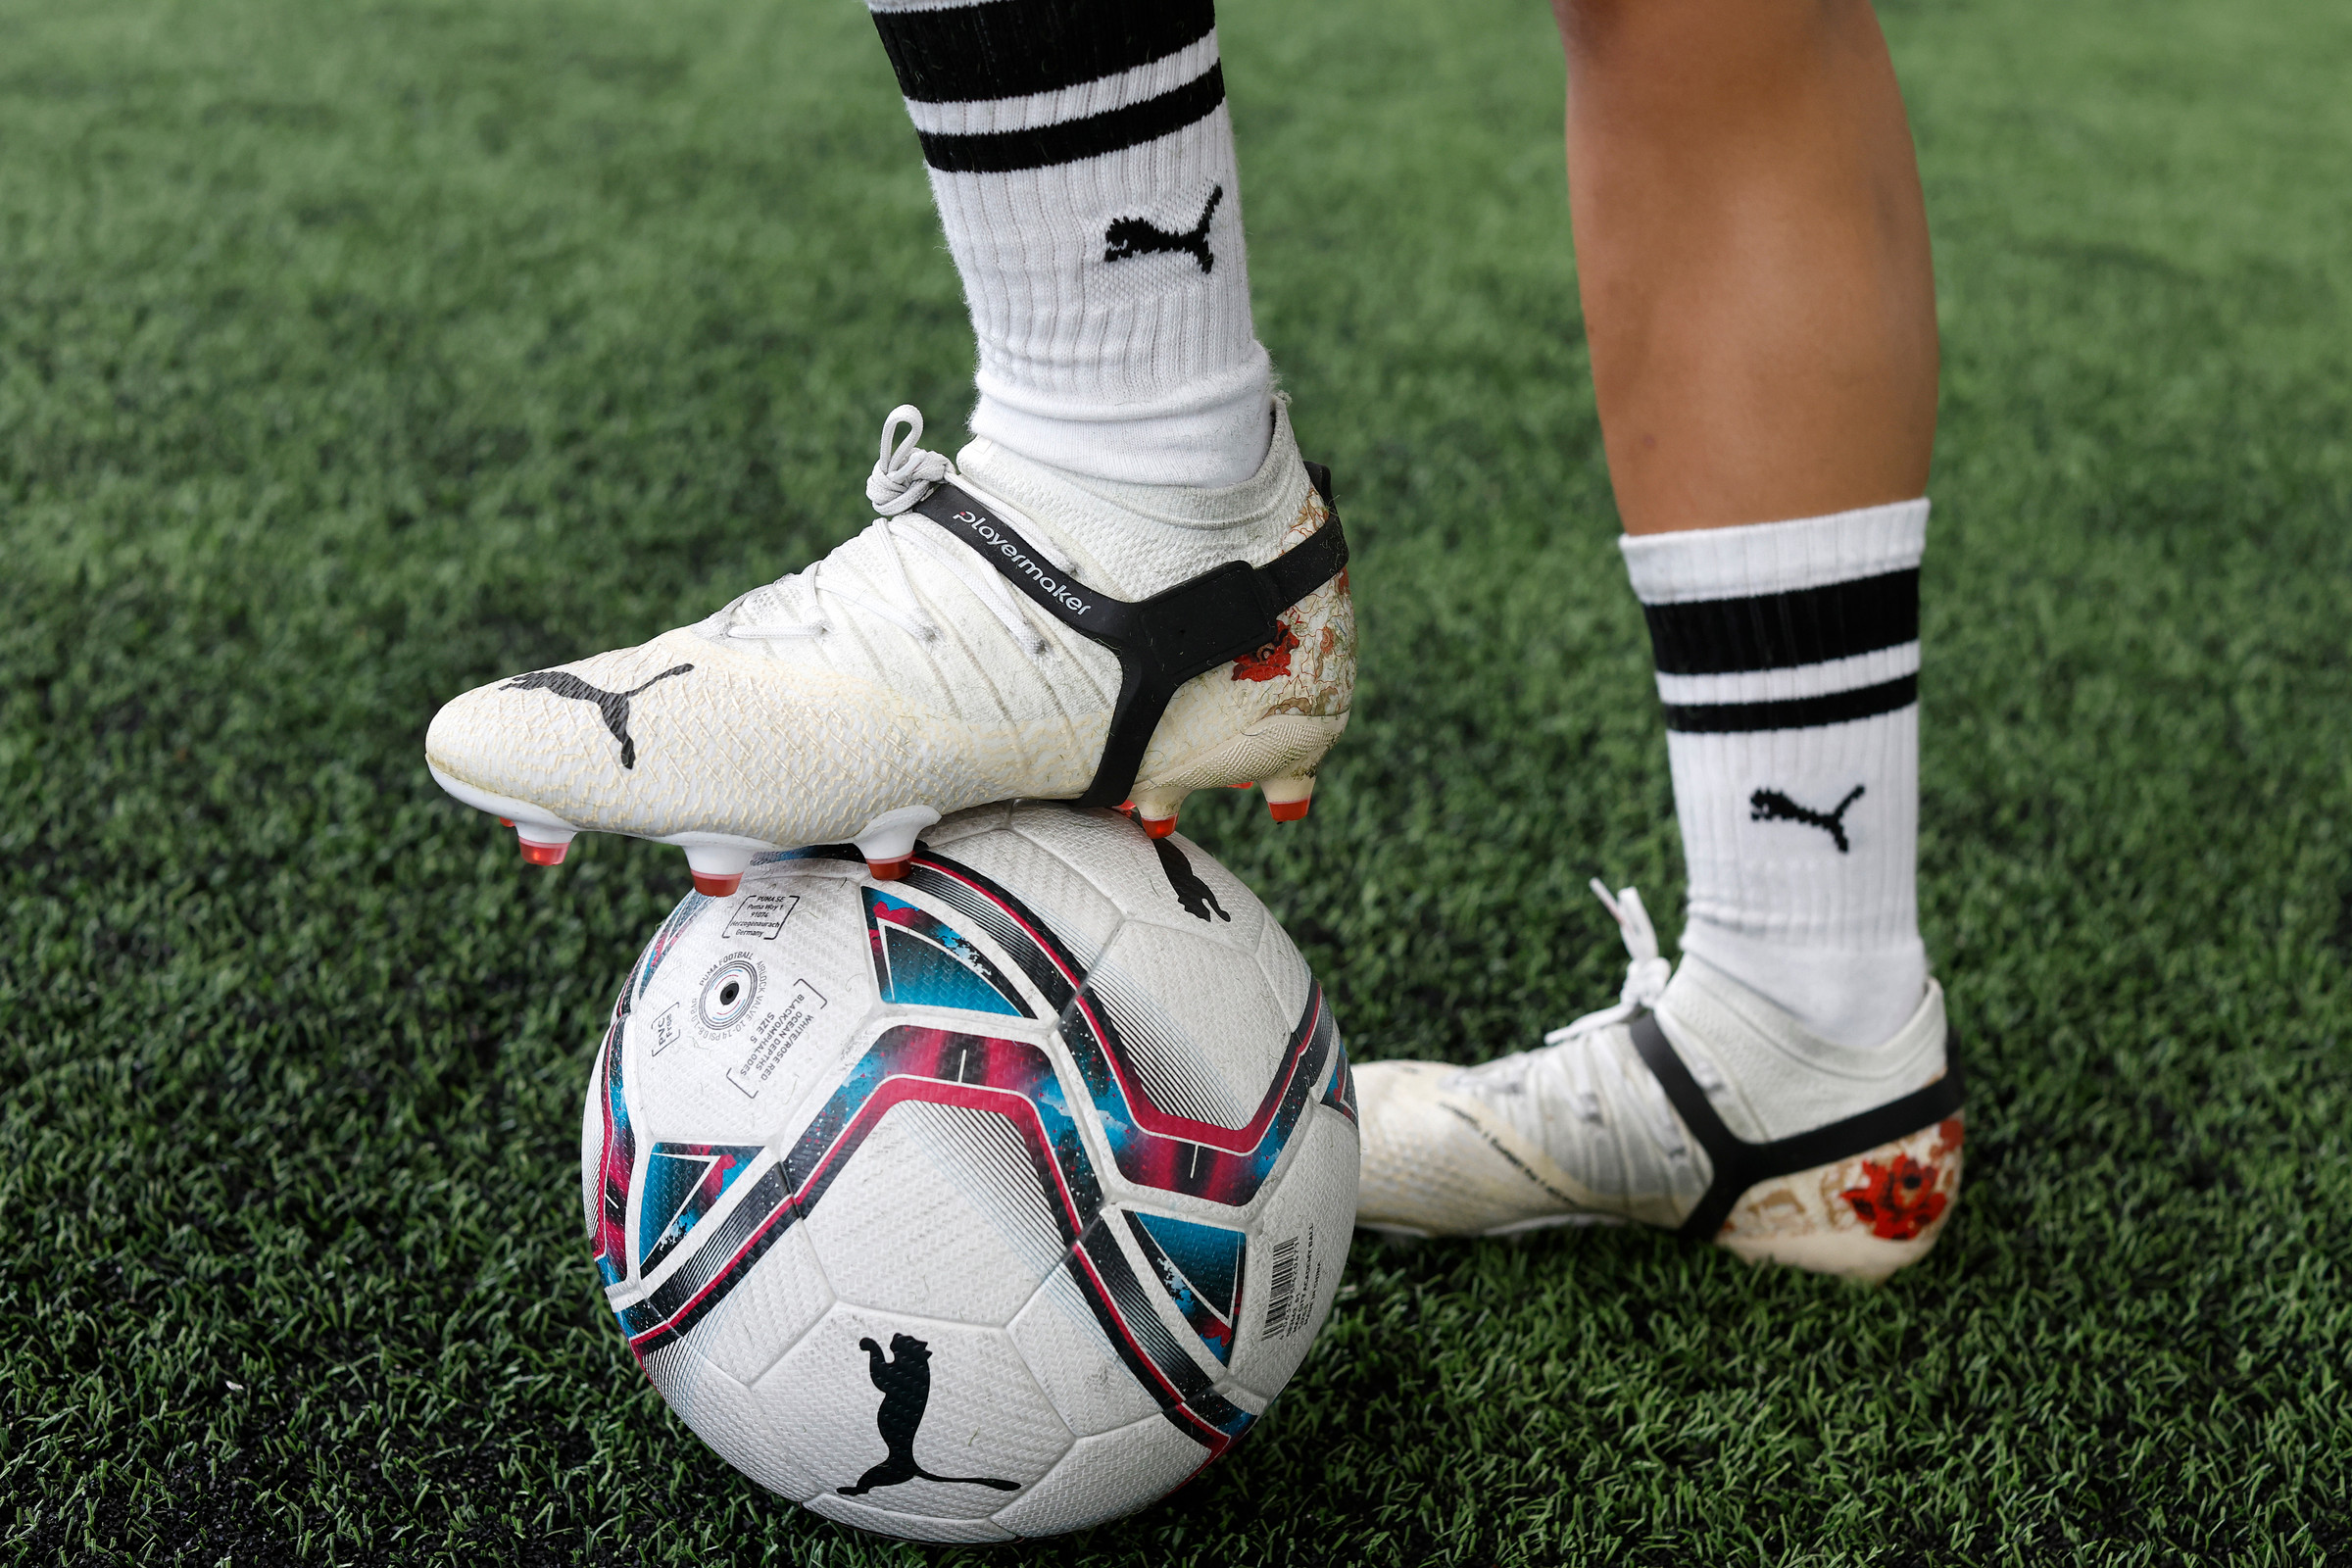 CITYPLAY tracker on a person’s cleats while stopping the soccer ball